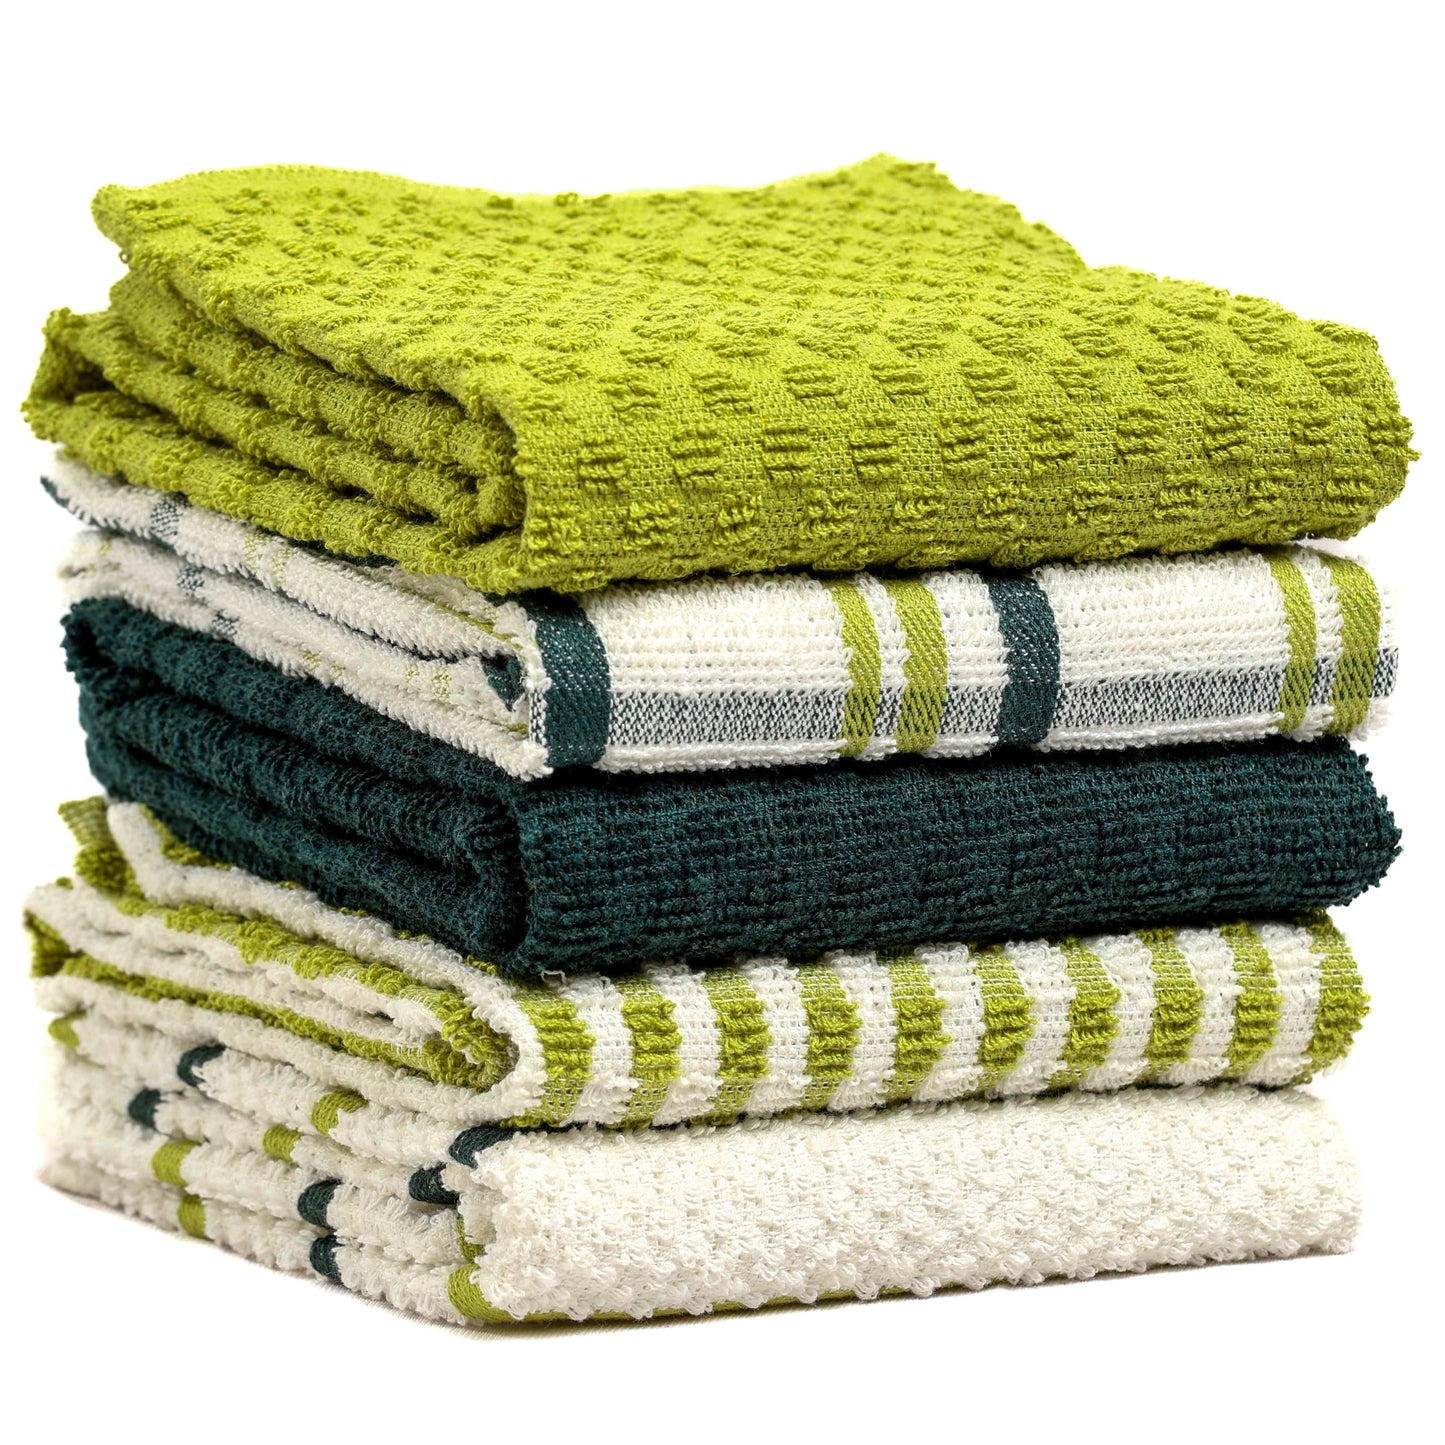 5 Pack Terry Kitchen Tea Towels Cotton Super Absorbent Quick Drying Sage Green OLIVIA ROCCO Kitchen Tea Towels